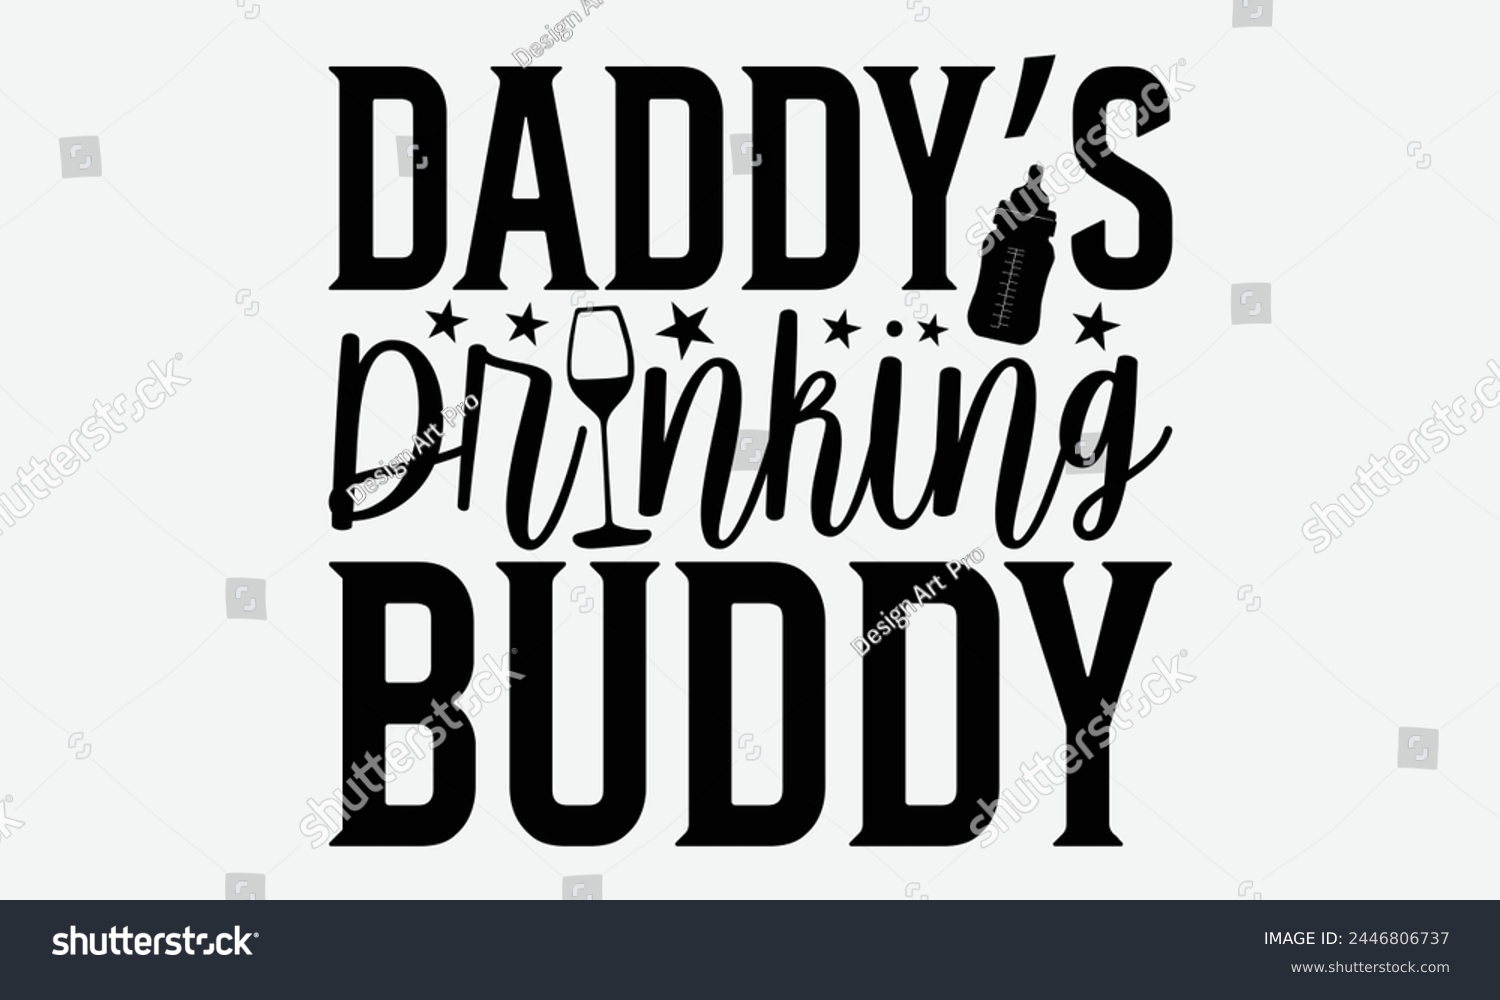 SVG of Daddy’s Drinking Buddy - Baby Typography T-Shirt Designs, Inspirational Calligraphy Decorations, Hand Drawn Lettering Phrase, Calligraphy Vector Illustration, For Poster, Wall, Banner. svg